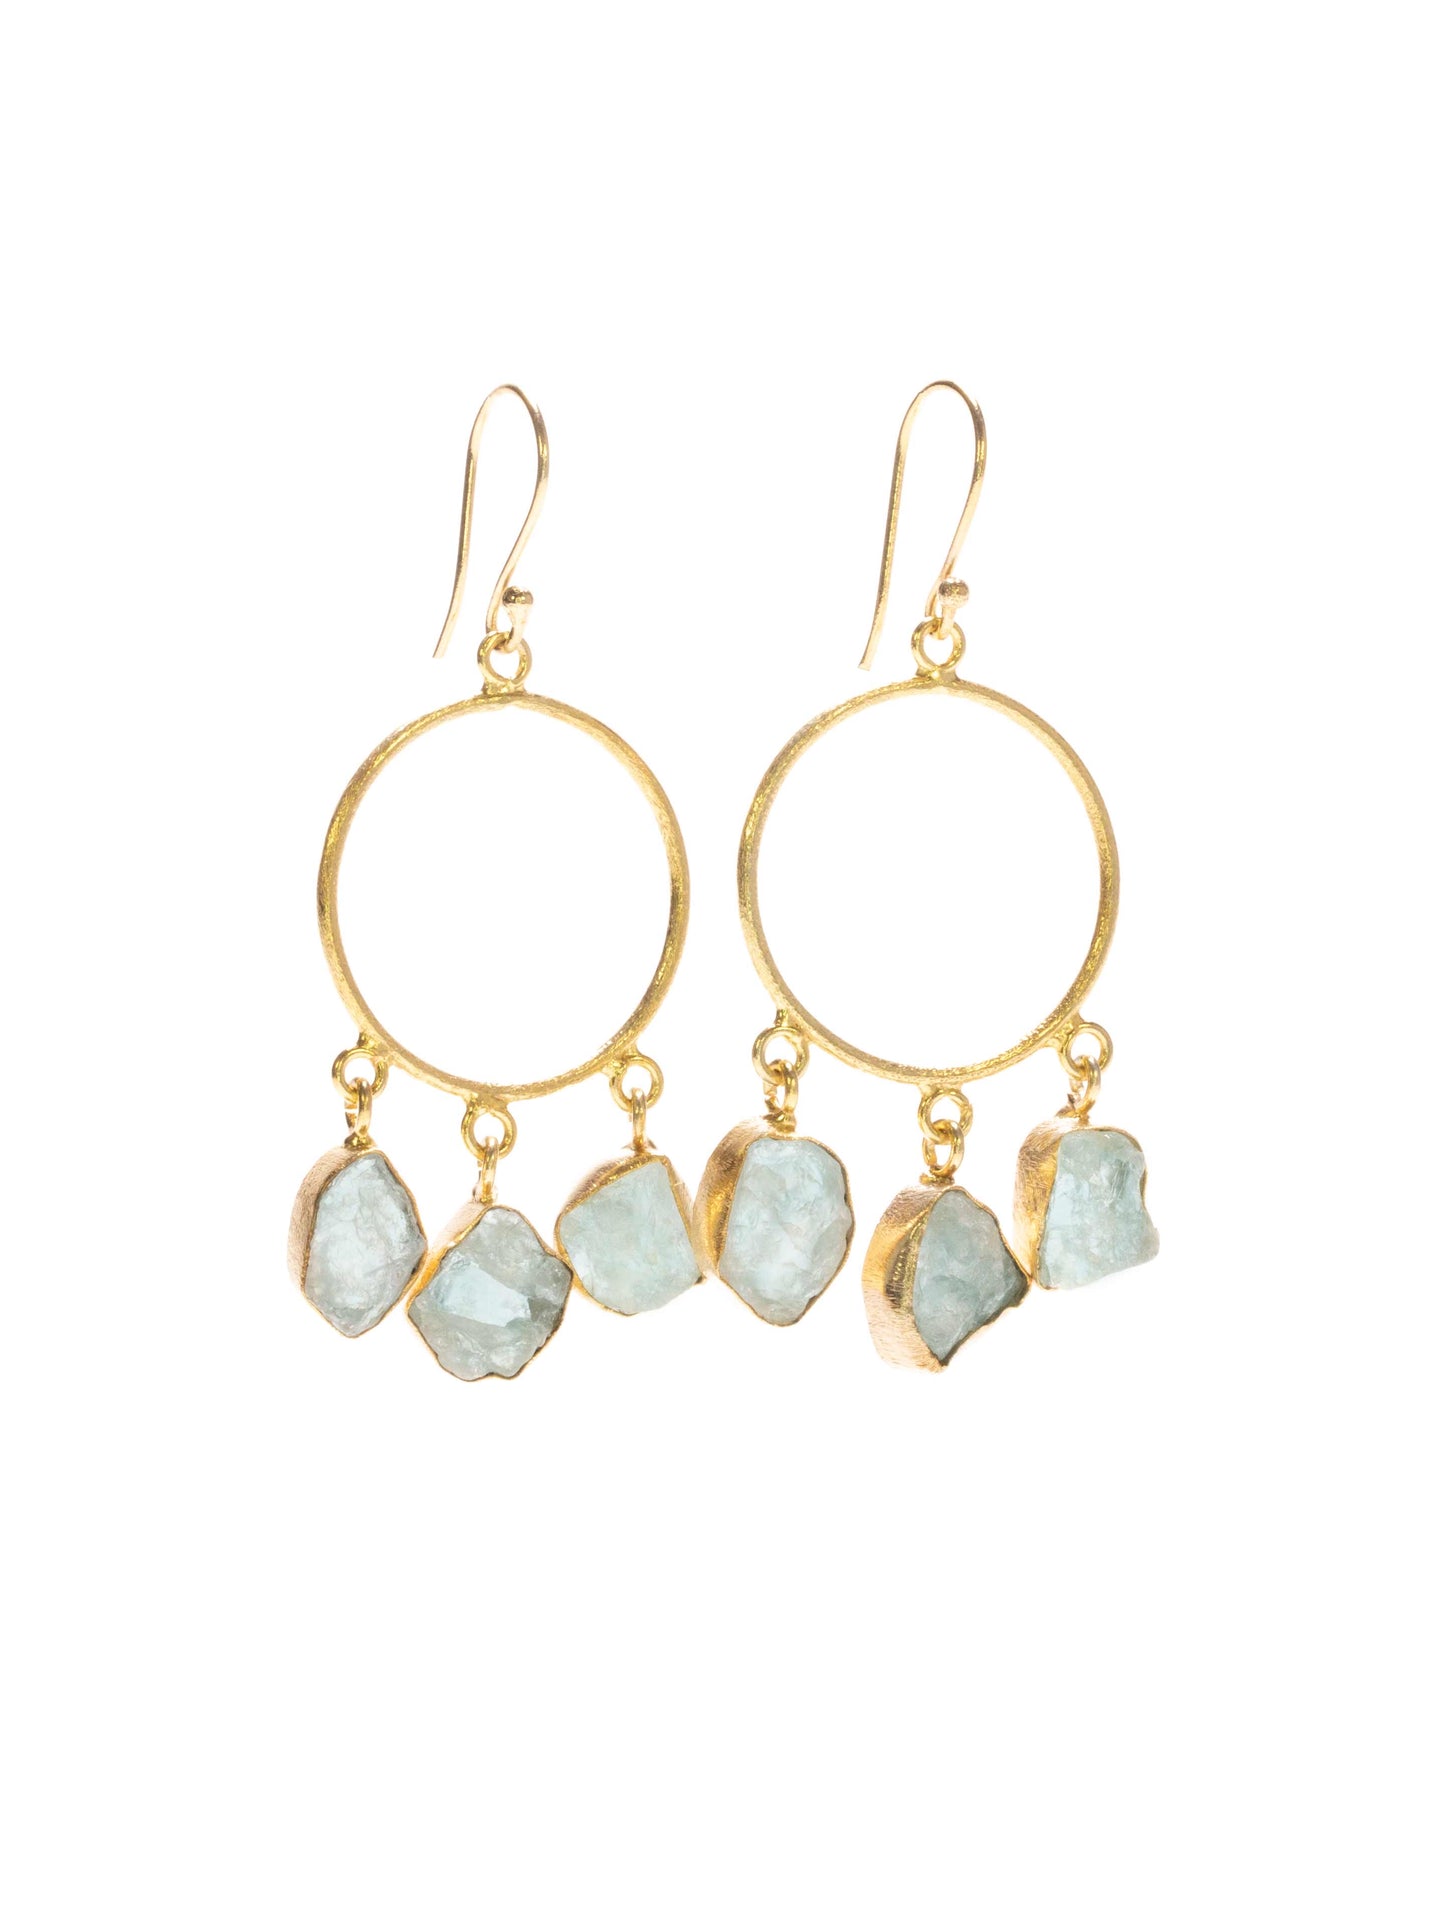 Round shaped gold earrings with aqua marine drops